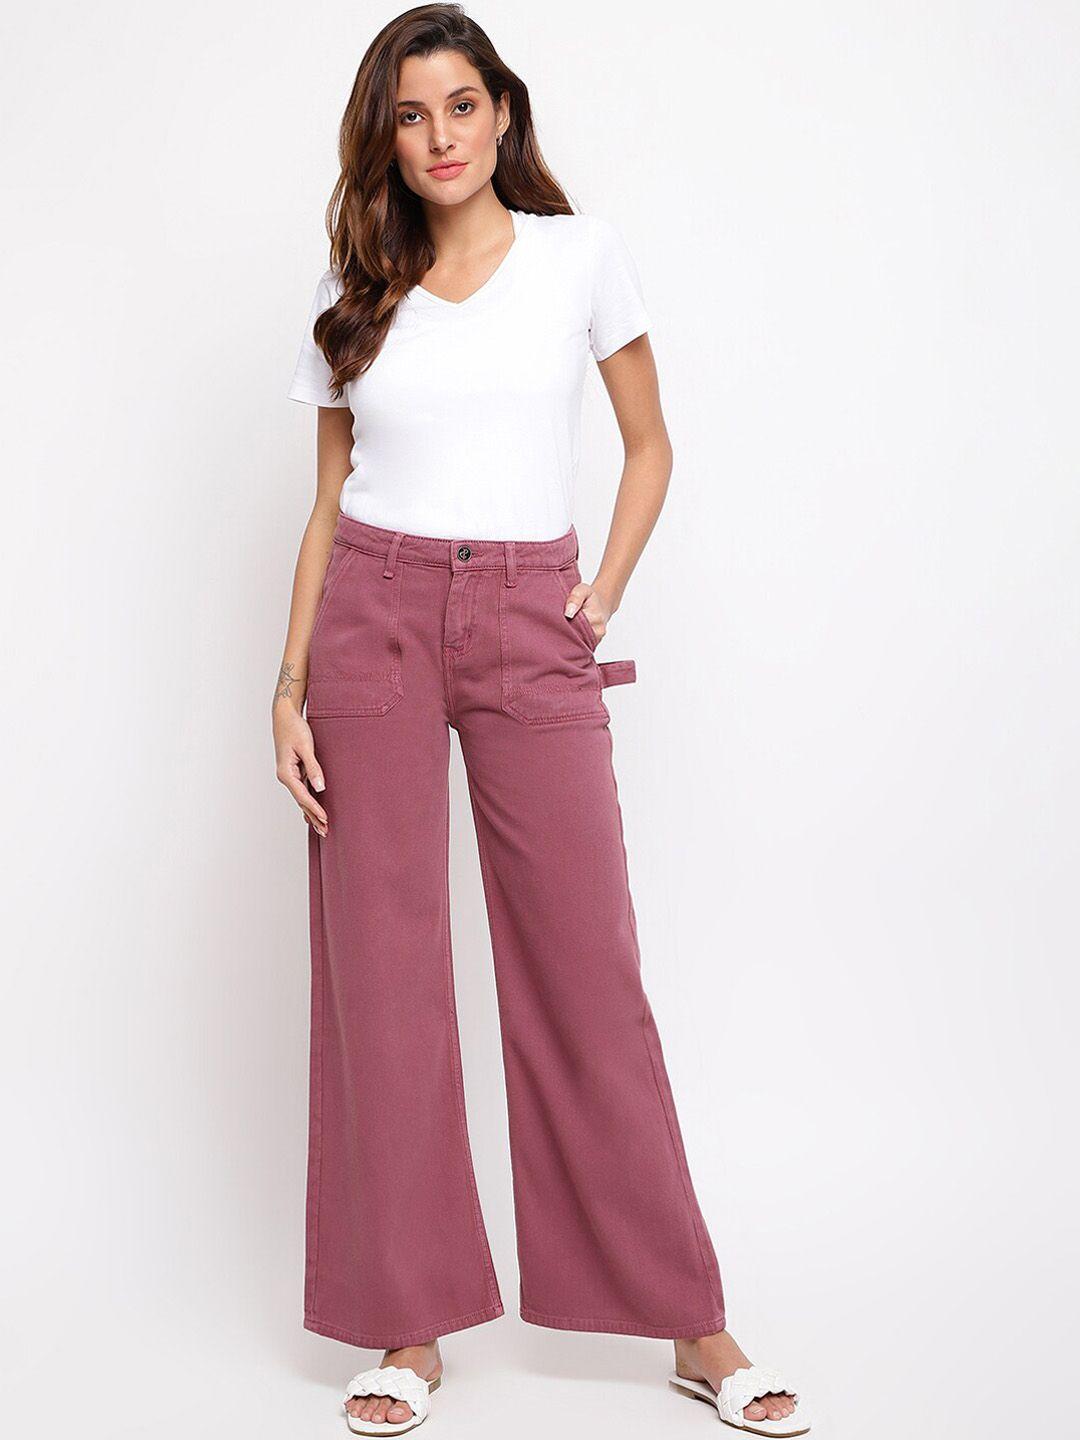 tales & stories women maroon wide leg stretchable jeans